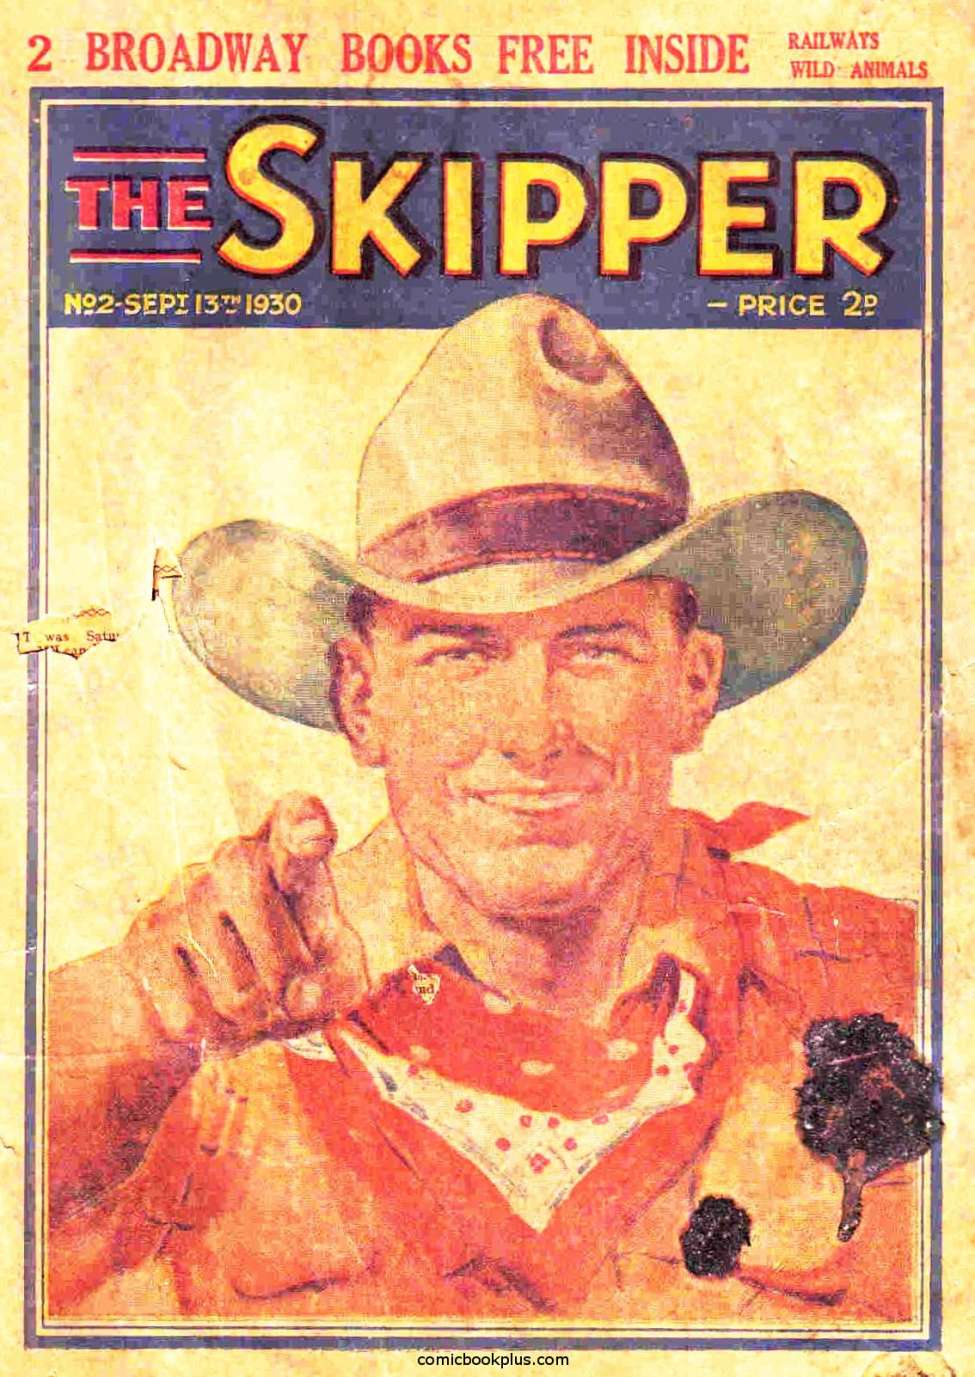 Book Cover For The Skipper 2